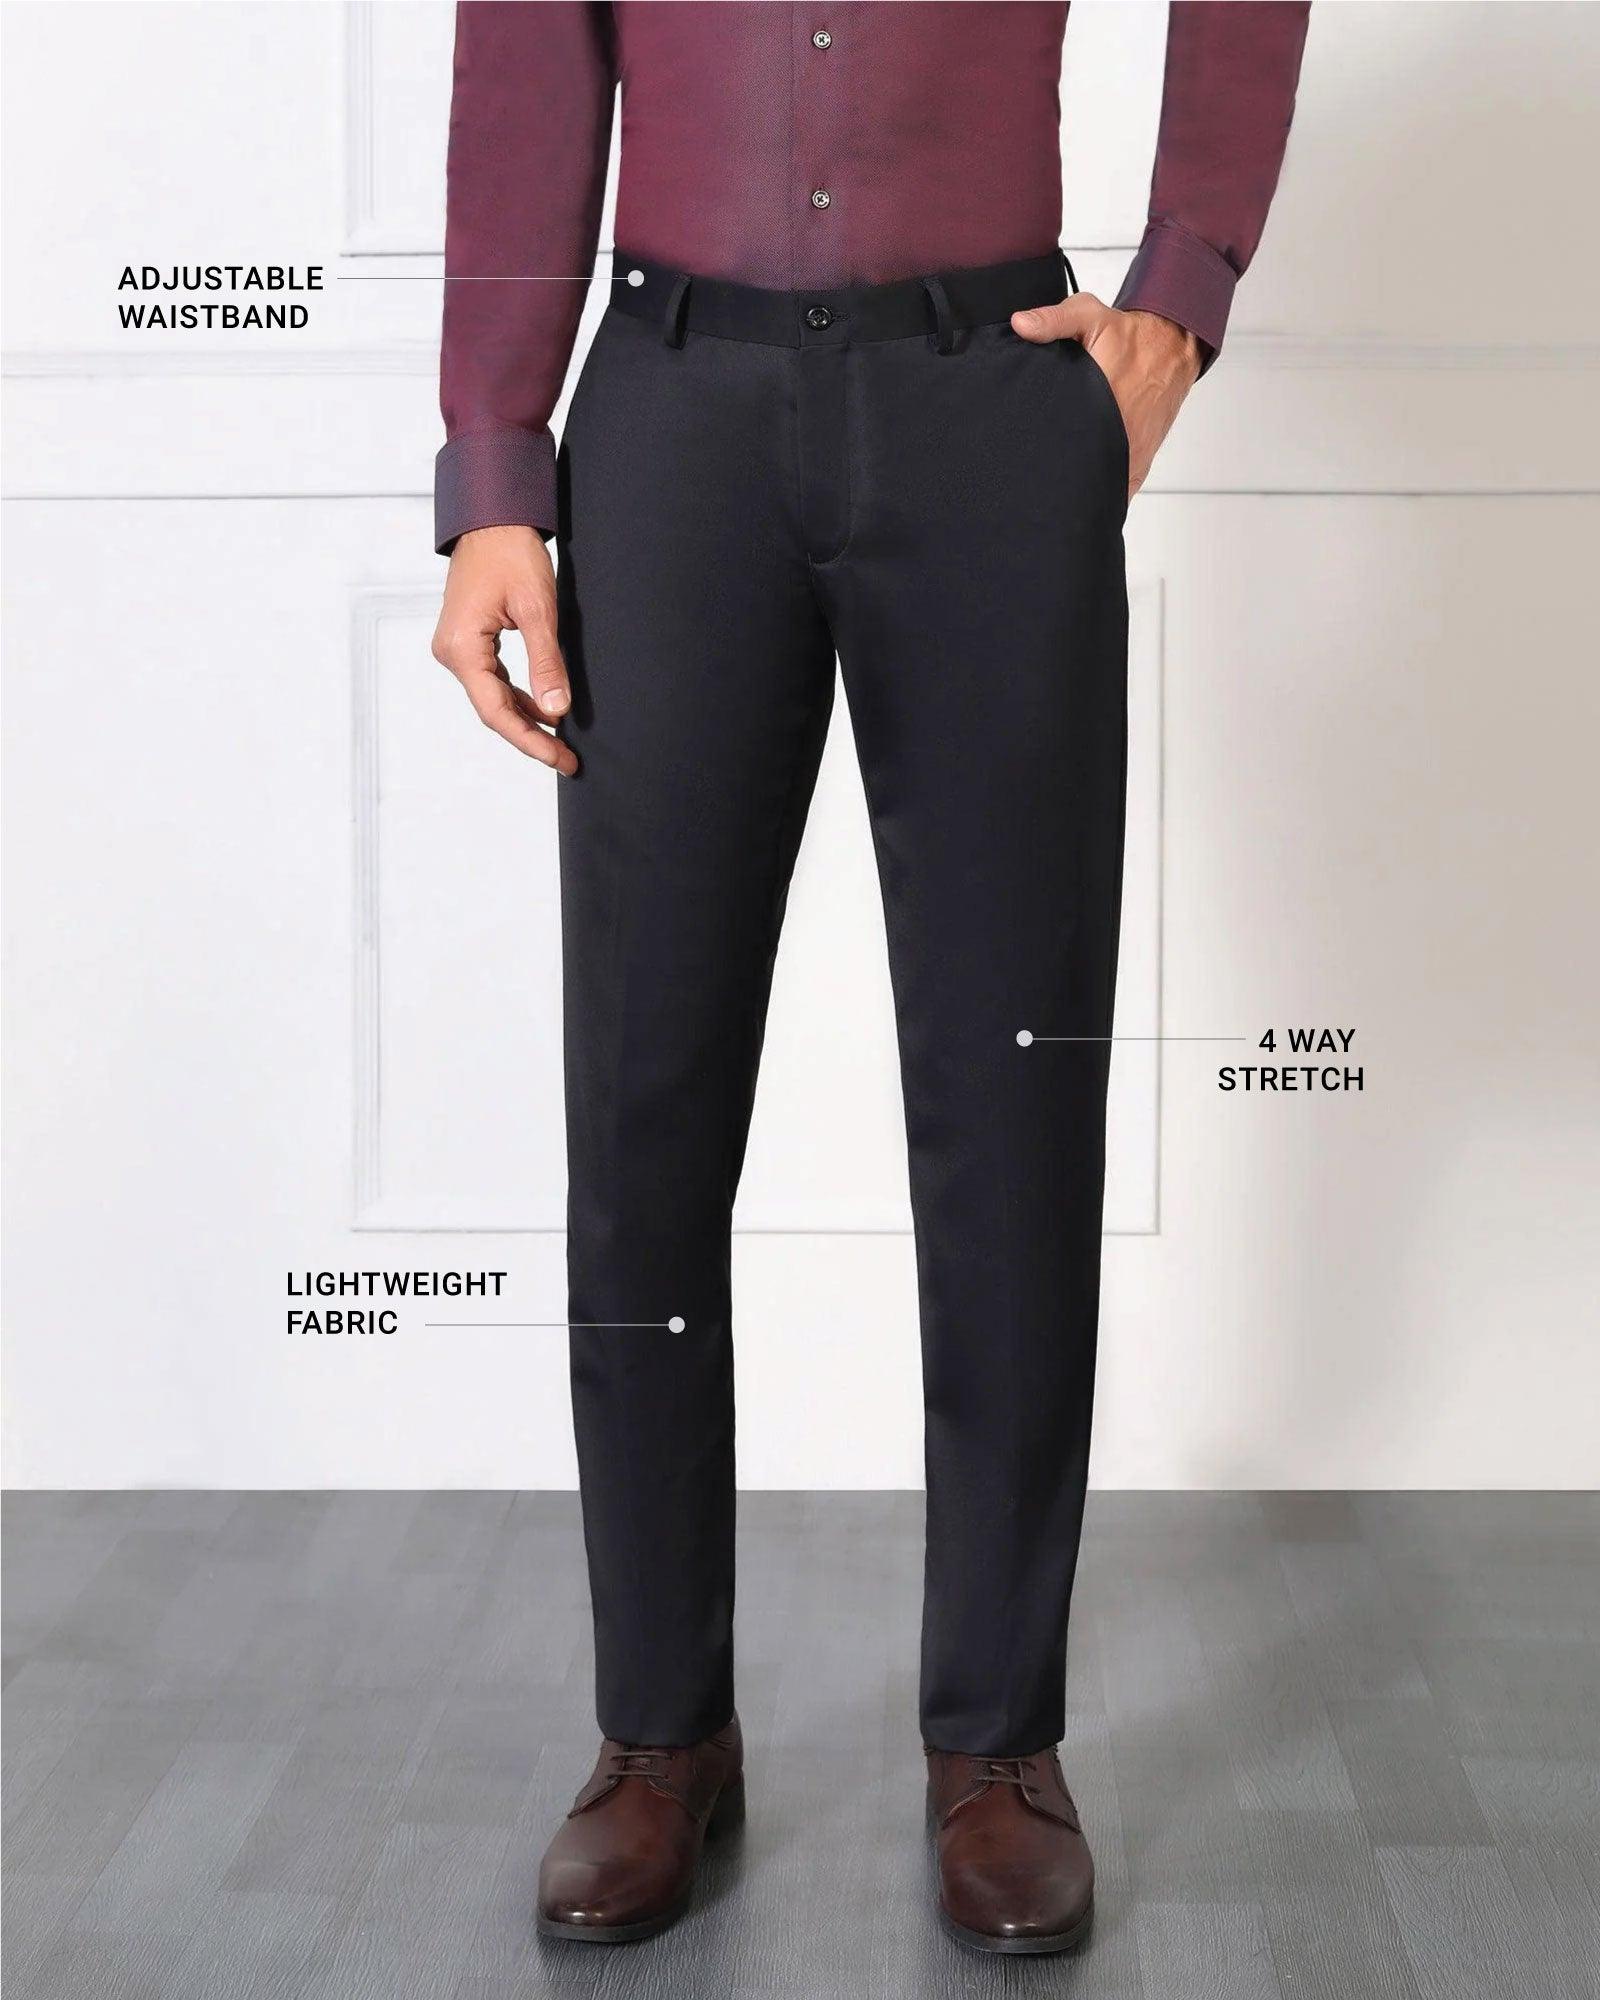 Buy Formal Stretchable Pant Navy Blue with Expandable Waist for Men.  Regular Fit, Flat Front, Premium Lycra Fabric Pants for Office, Party and  Casual Wear (XL) at Amazon.in